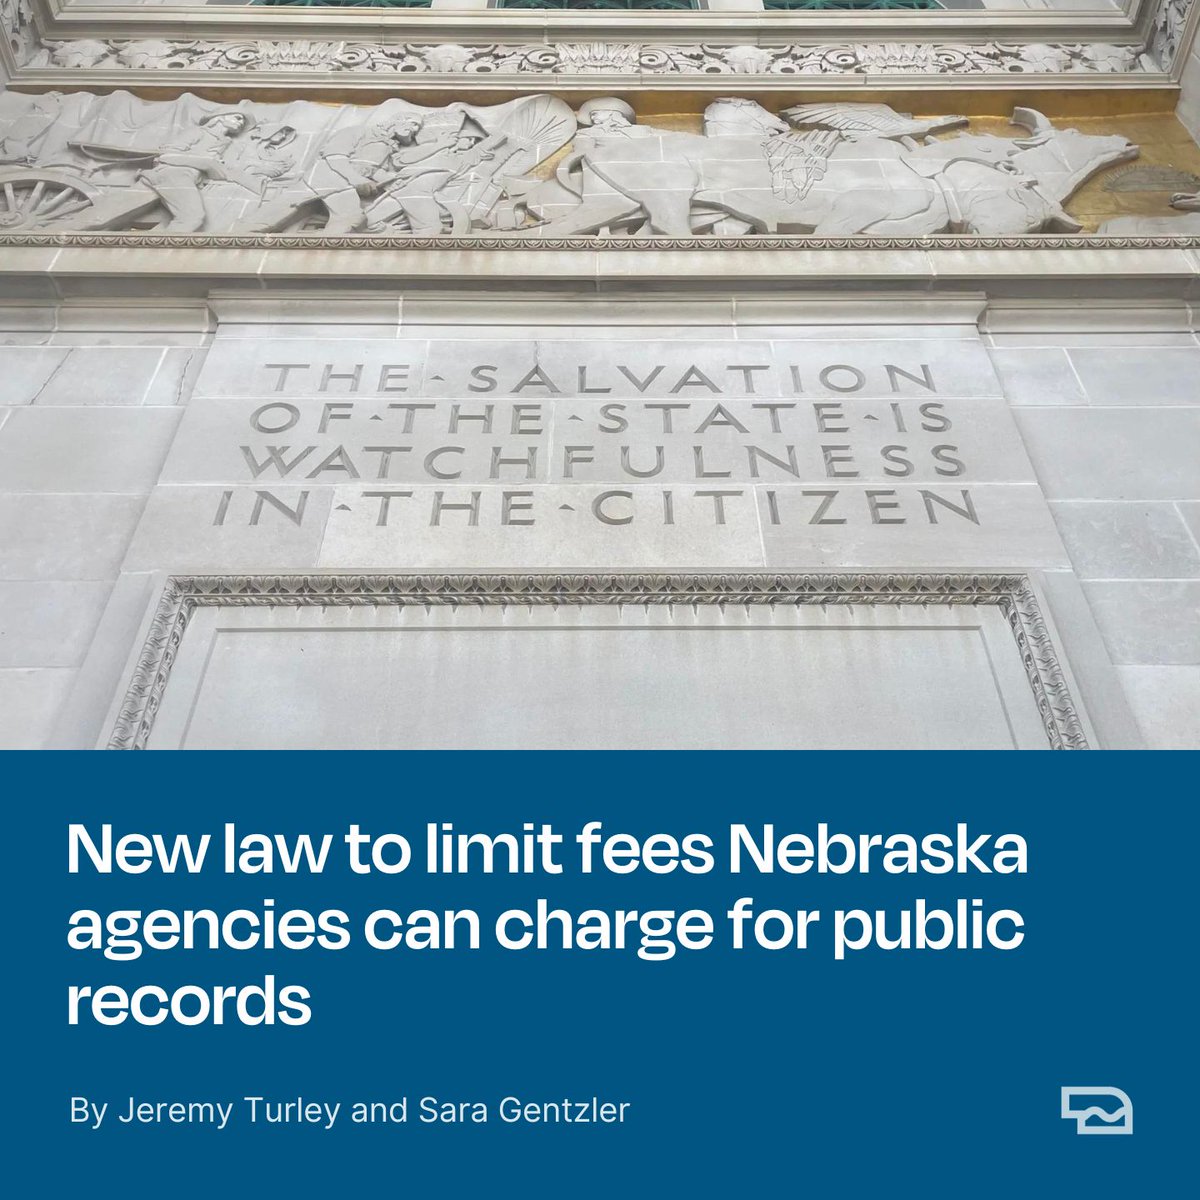 New @ FFP: The Nebraska Supreme Court recently ruled that government agencies can charge fees for the cost of rank-and-file employees to review information requested by the public. A bill signed by Gov. Pillen Wednesday will ban those fees. Read more: buff.ly/43Fzr8X